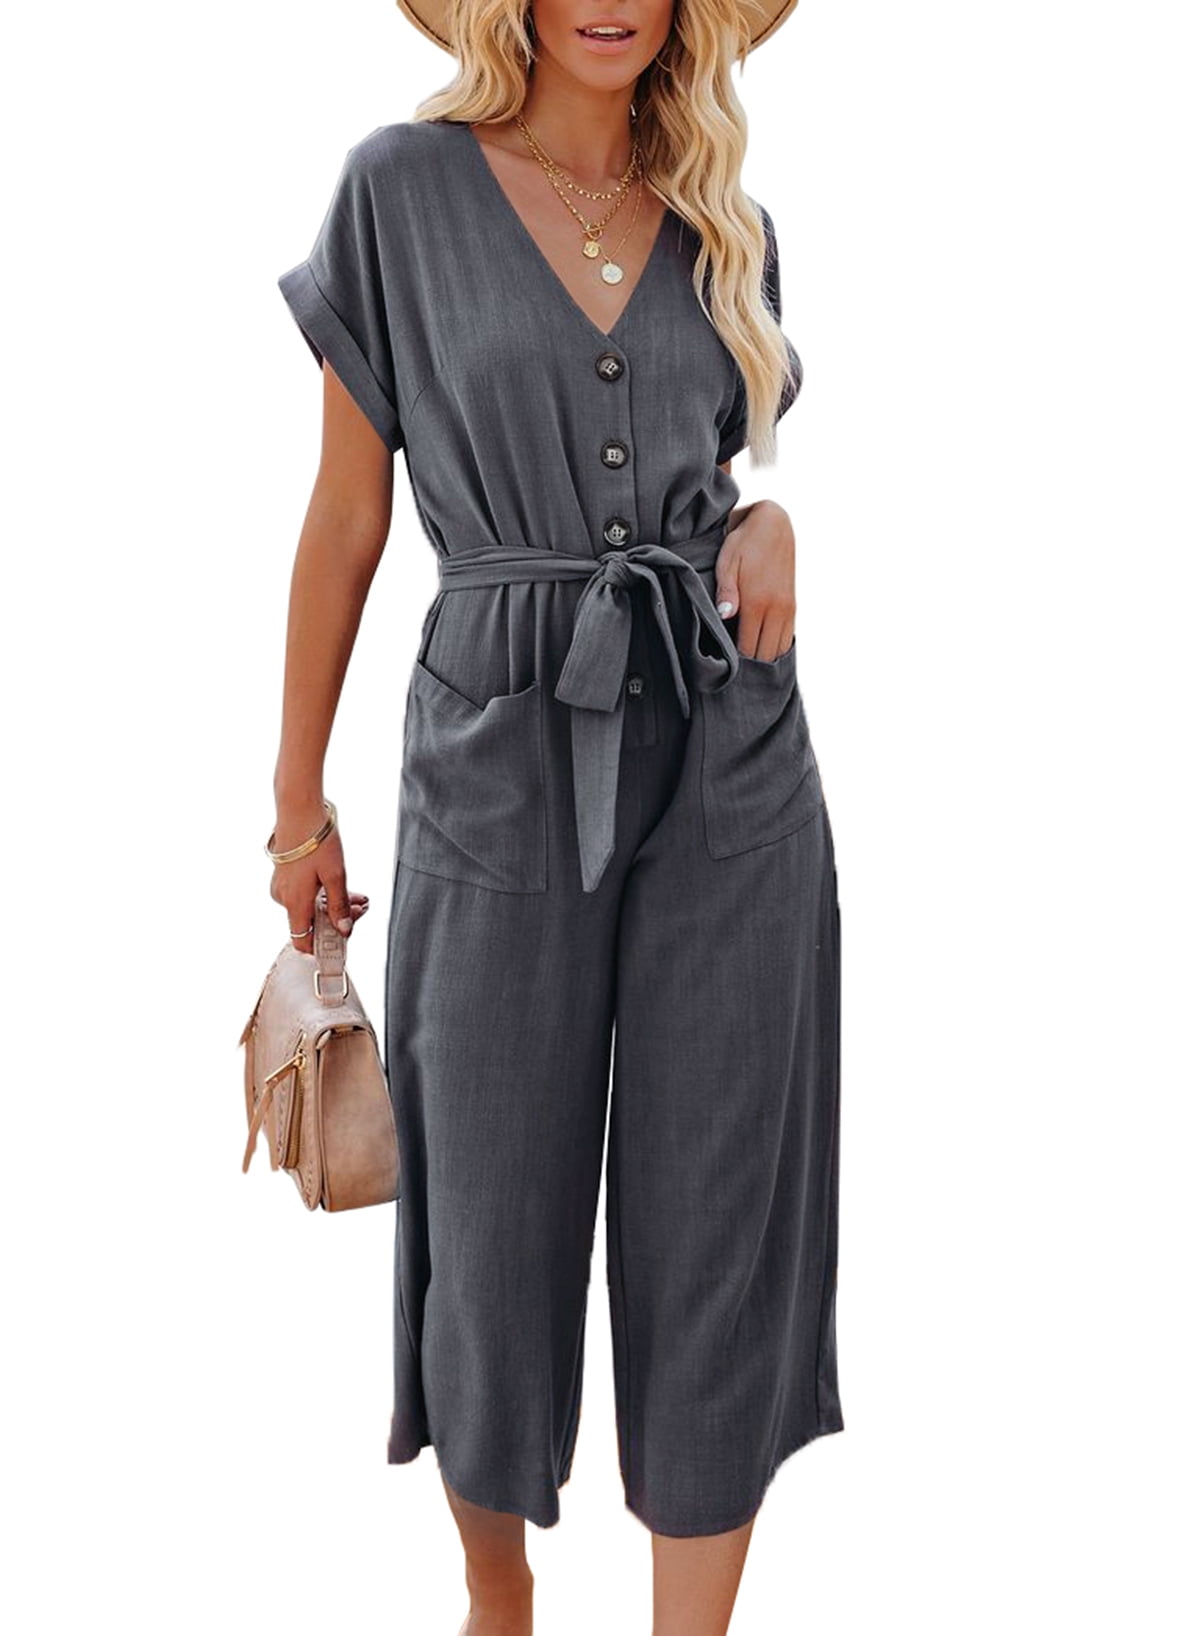 Boohoo V Neck Belted Jumpsuit in Grey Womens Clothing Jumpsuits and rompers Full-length jumpsuits and rompers Grey 